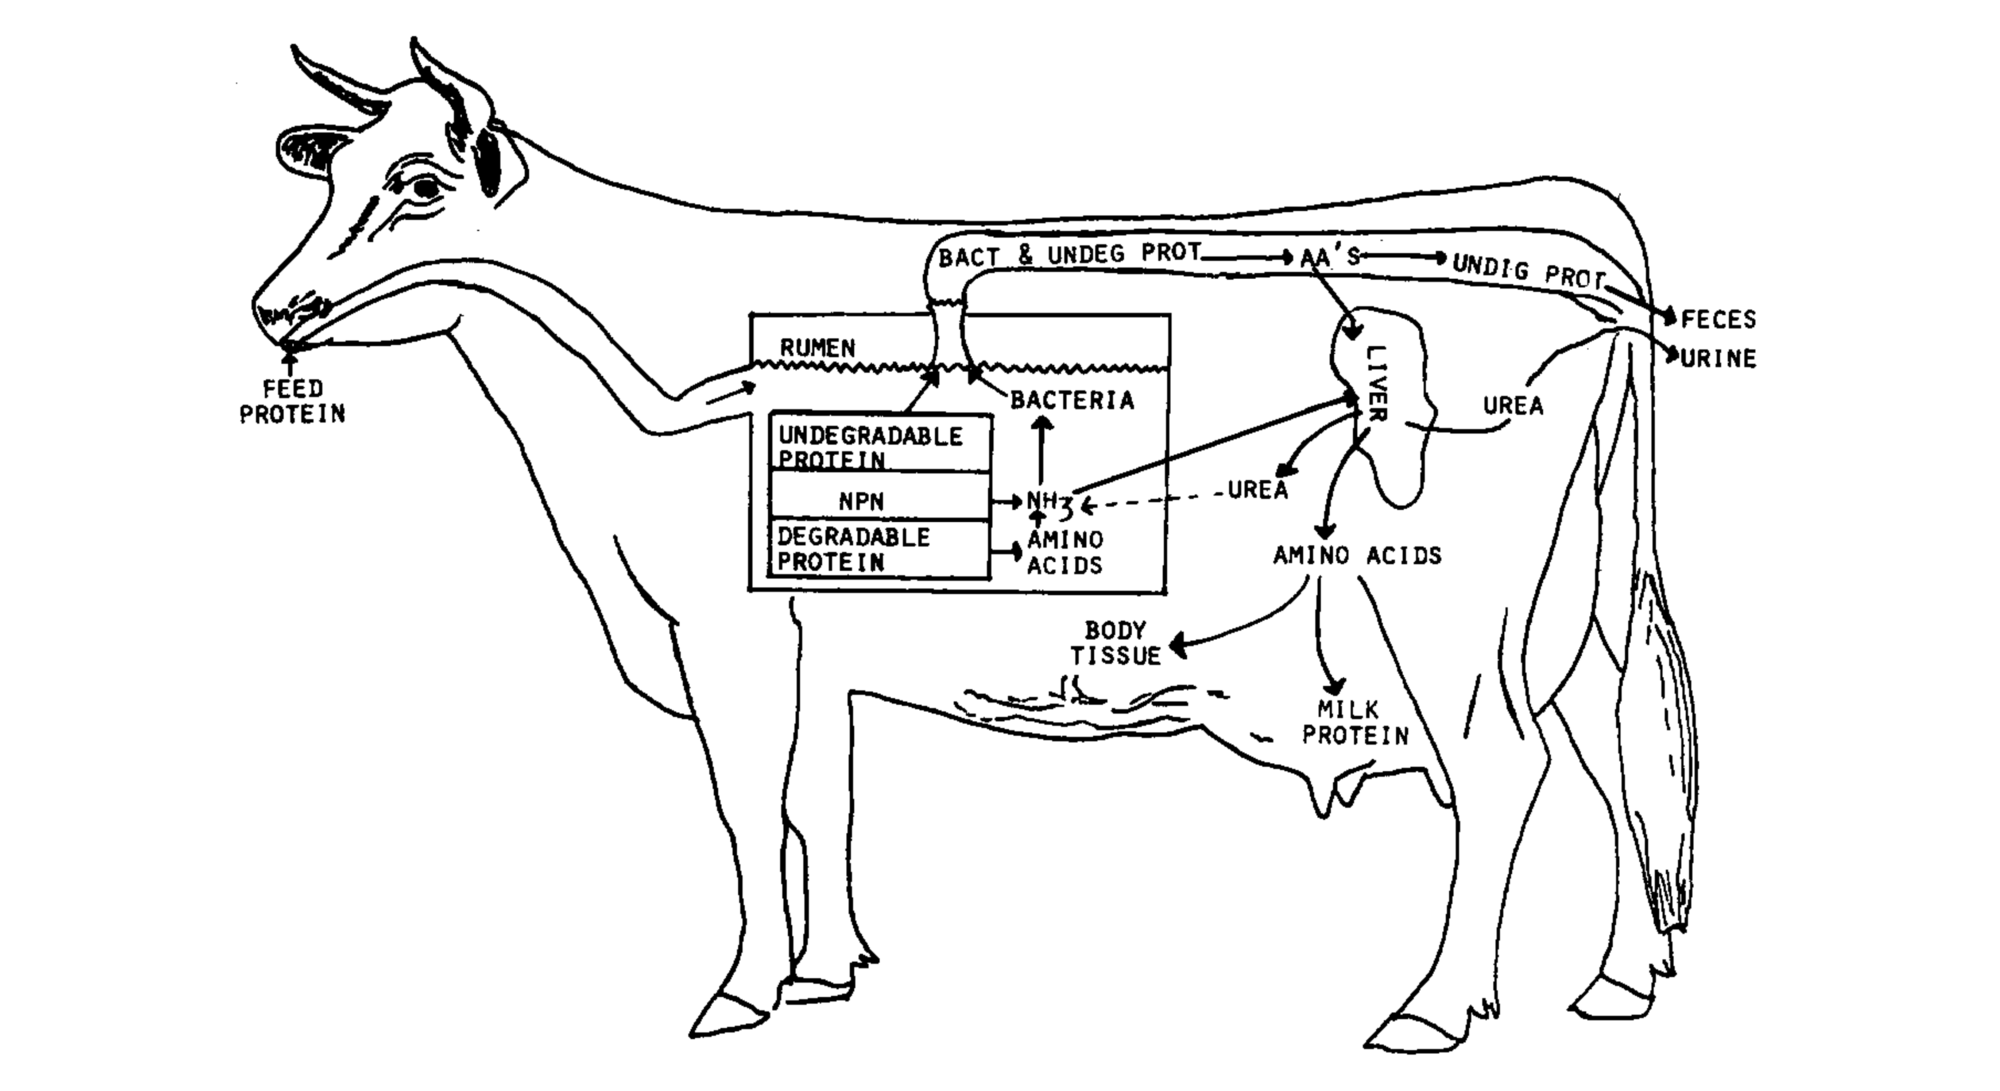 Digestive path of protein in cattle.